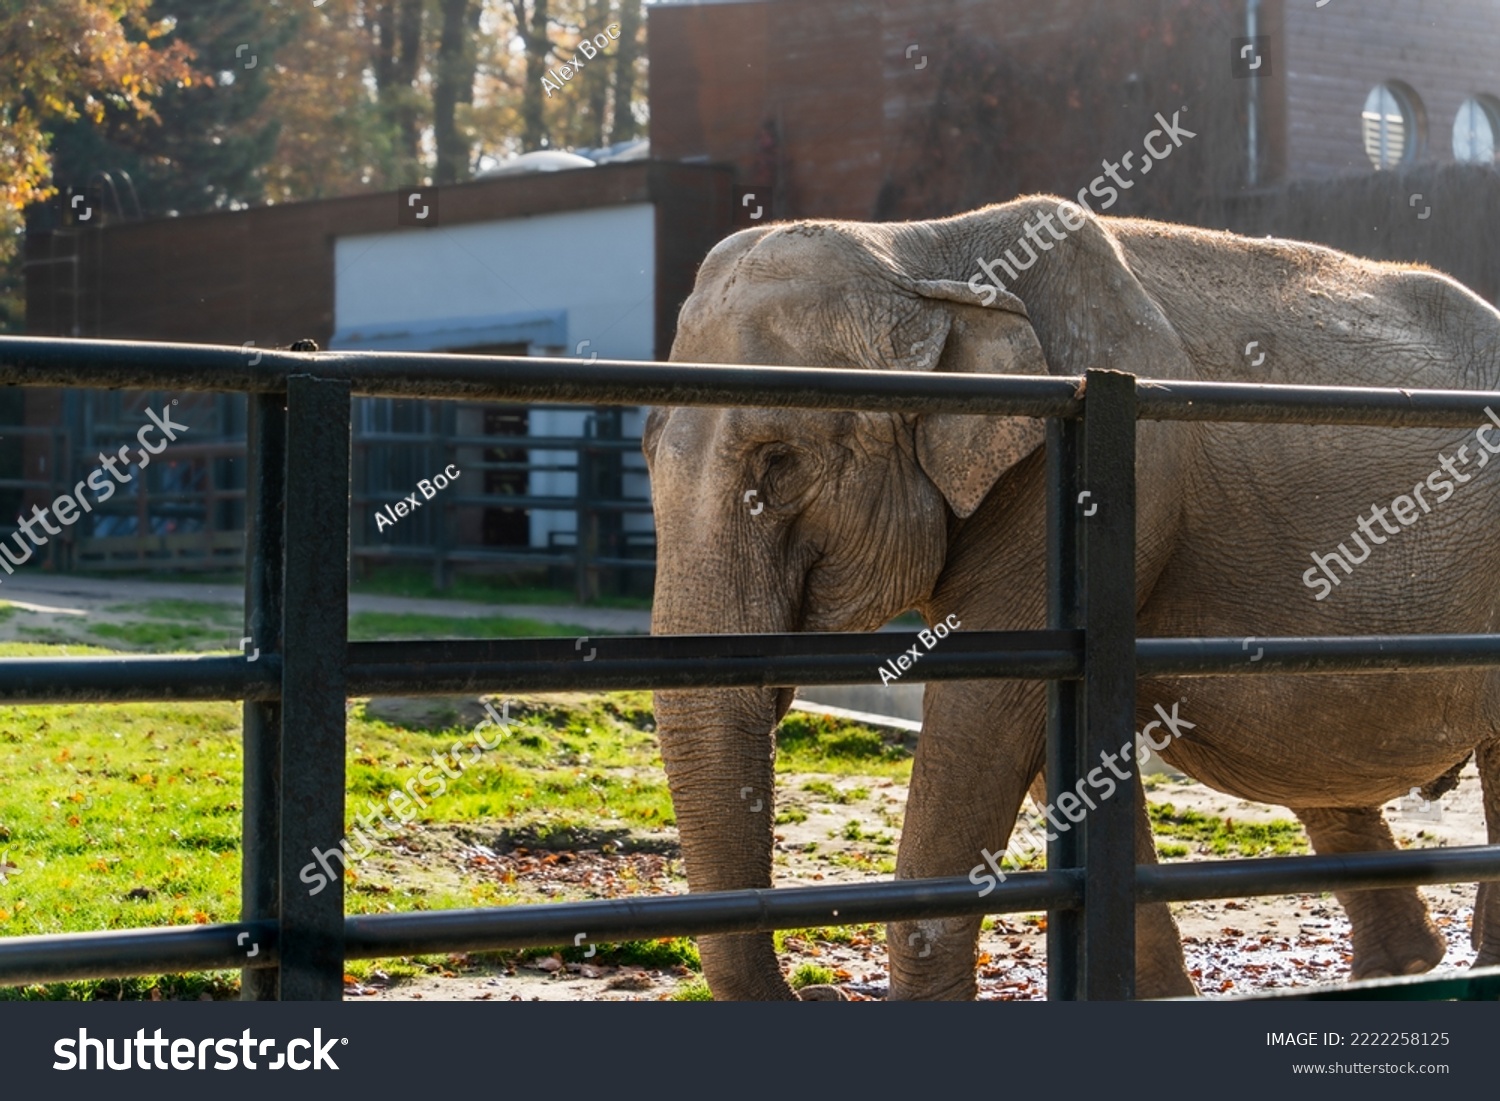 A large African elephant with a wrinkled pelt walks along the metal fence of a zoo enclosure on a sunny day, depiction of captive animals #2222258125